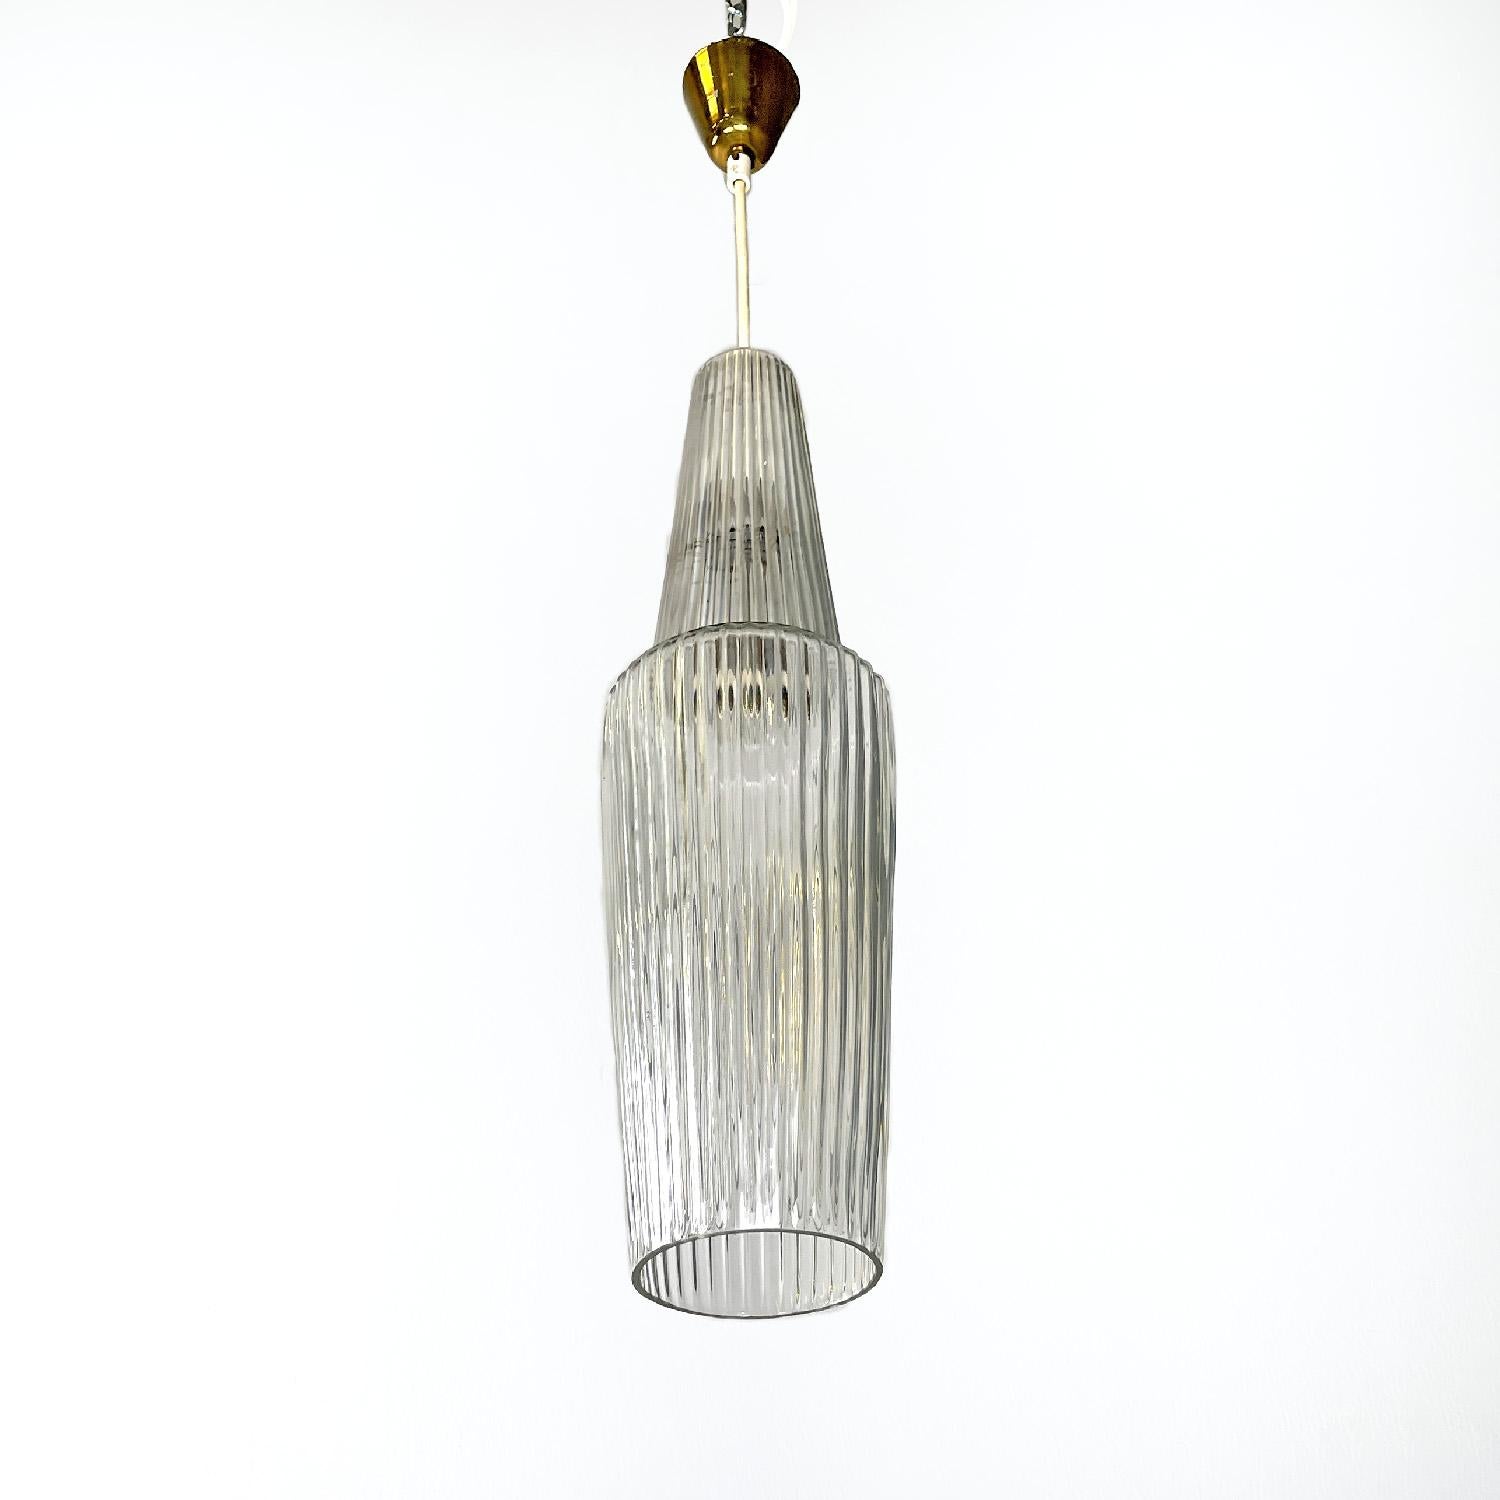 Italian mid-century modern golden plastic and fluted glass chandelier, 1950s
Round glass base chandelier. The diffuser is elongated with a vertical geometric texture, in the central part the glass narrows creating a step. The ceiling attachment is